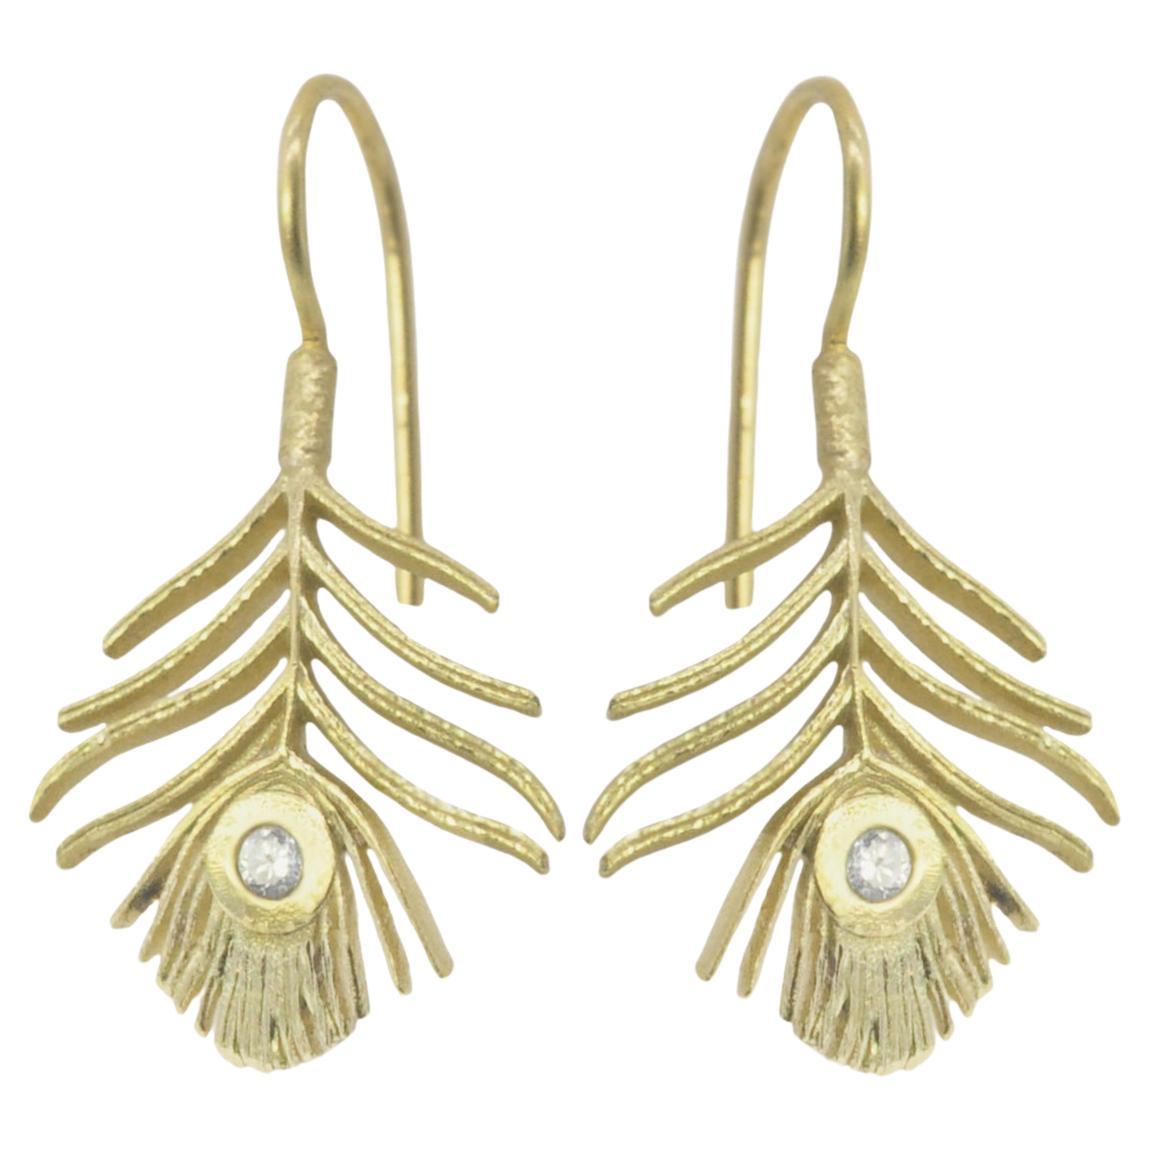 Tiny Gold Peacock Feather Earrings, 18k Yellow Gold